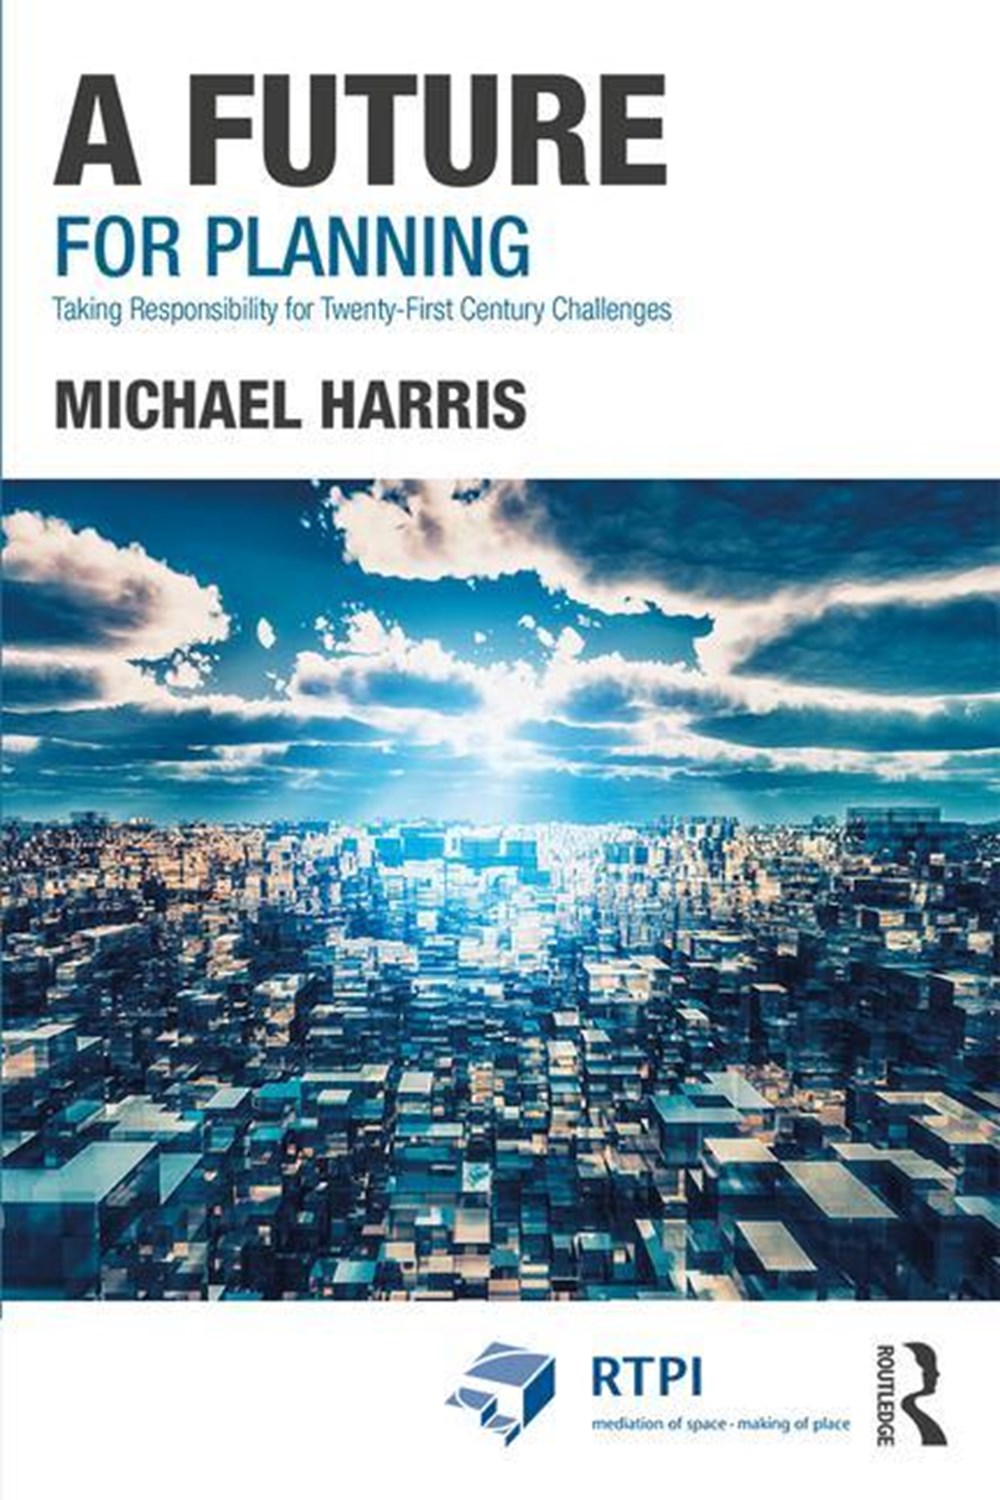 Future for Planning: Taking Responsibility for Twenty-First Century Challenges